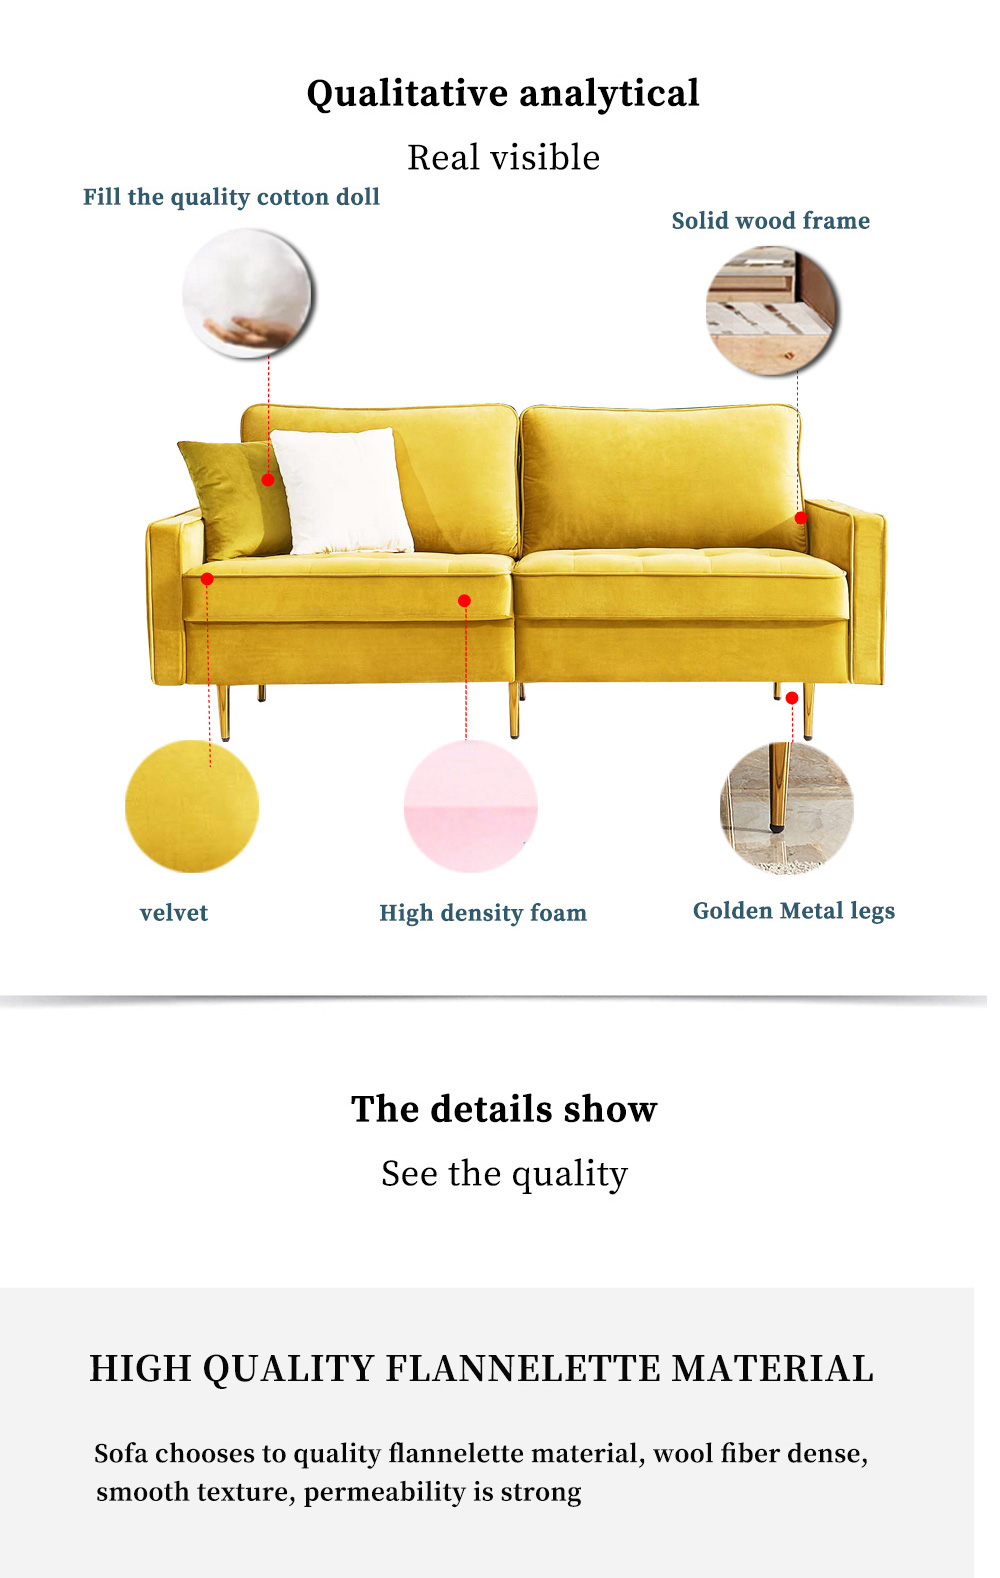 71" 3-Seat Velvet Upholstered Sofa with 2 Pillows, Wooden Frame and Metal Feet, for Living Room, Bedroom, Office, Apartment - Yellow